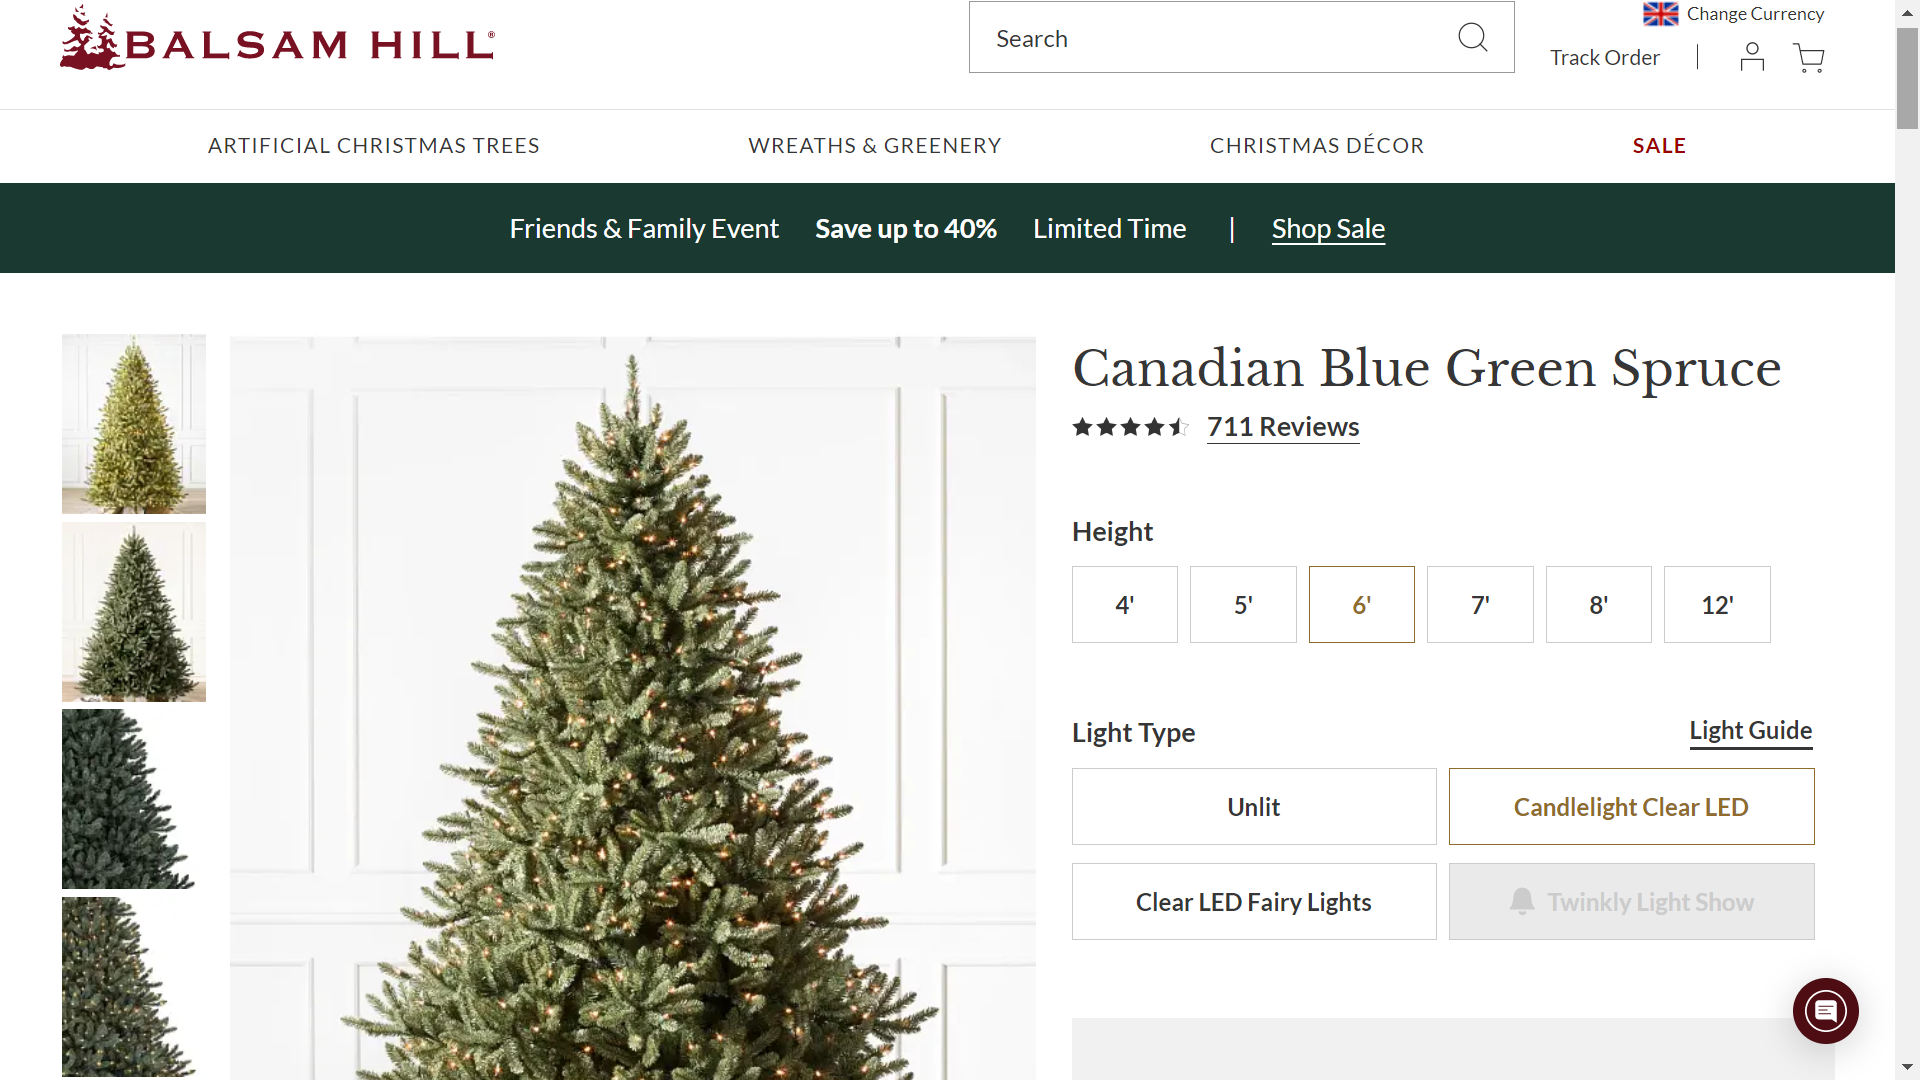 BH (The worlds leading Christmas Tree Brand) Canadian Blue Green Spruce 6' Tree with LED Clear - Image 2 of 2